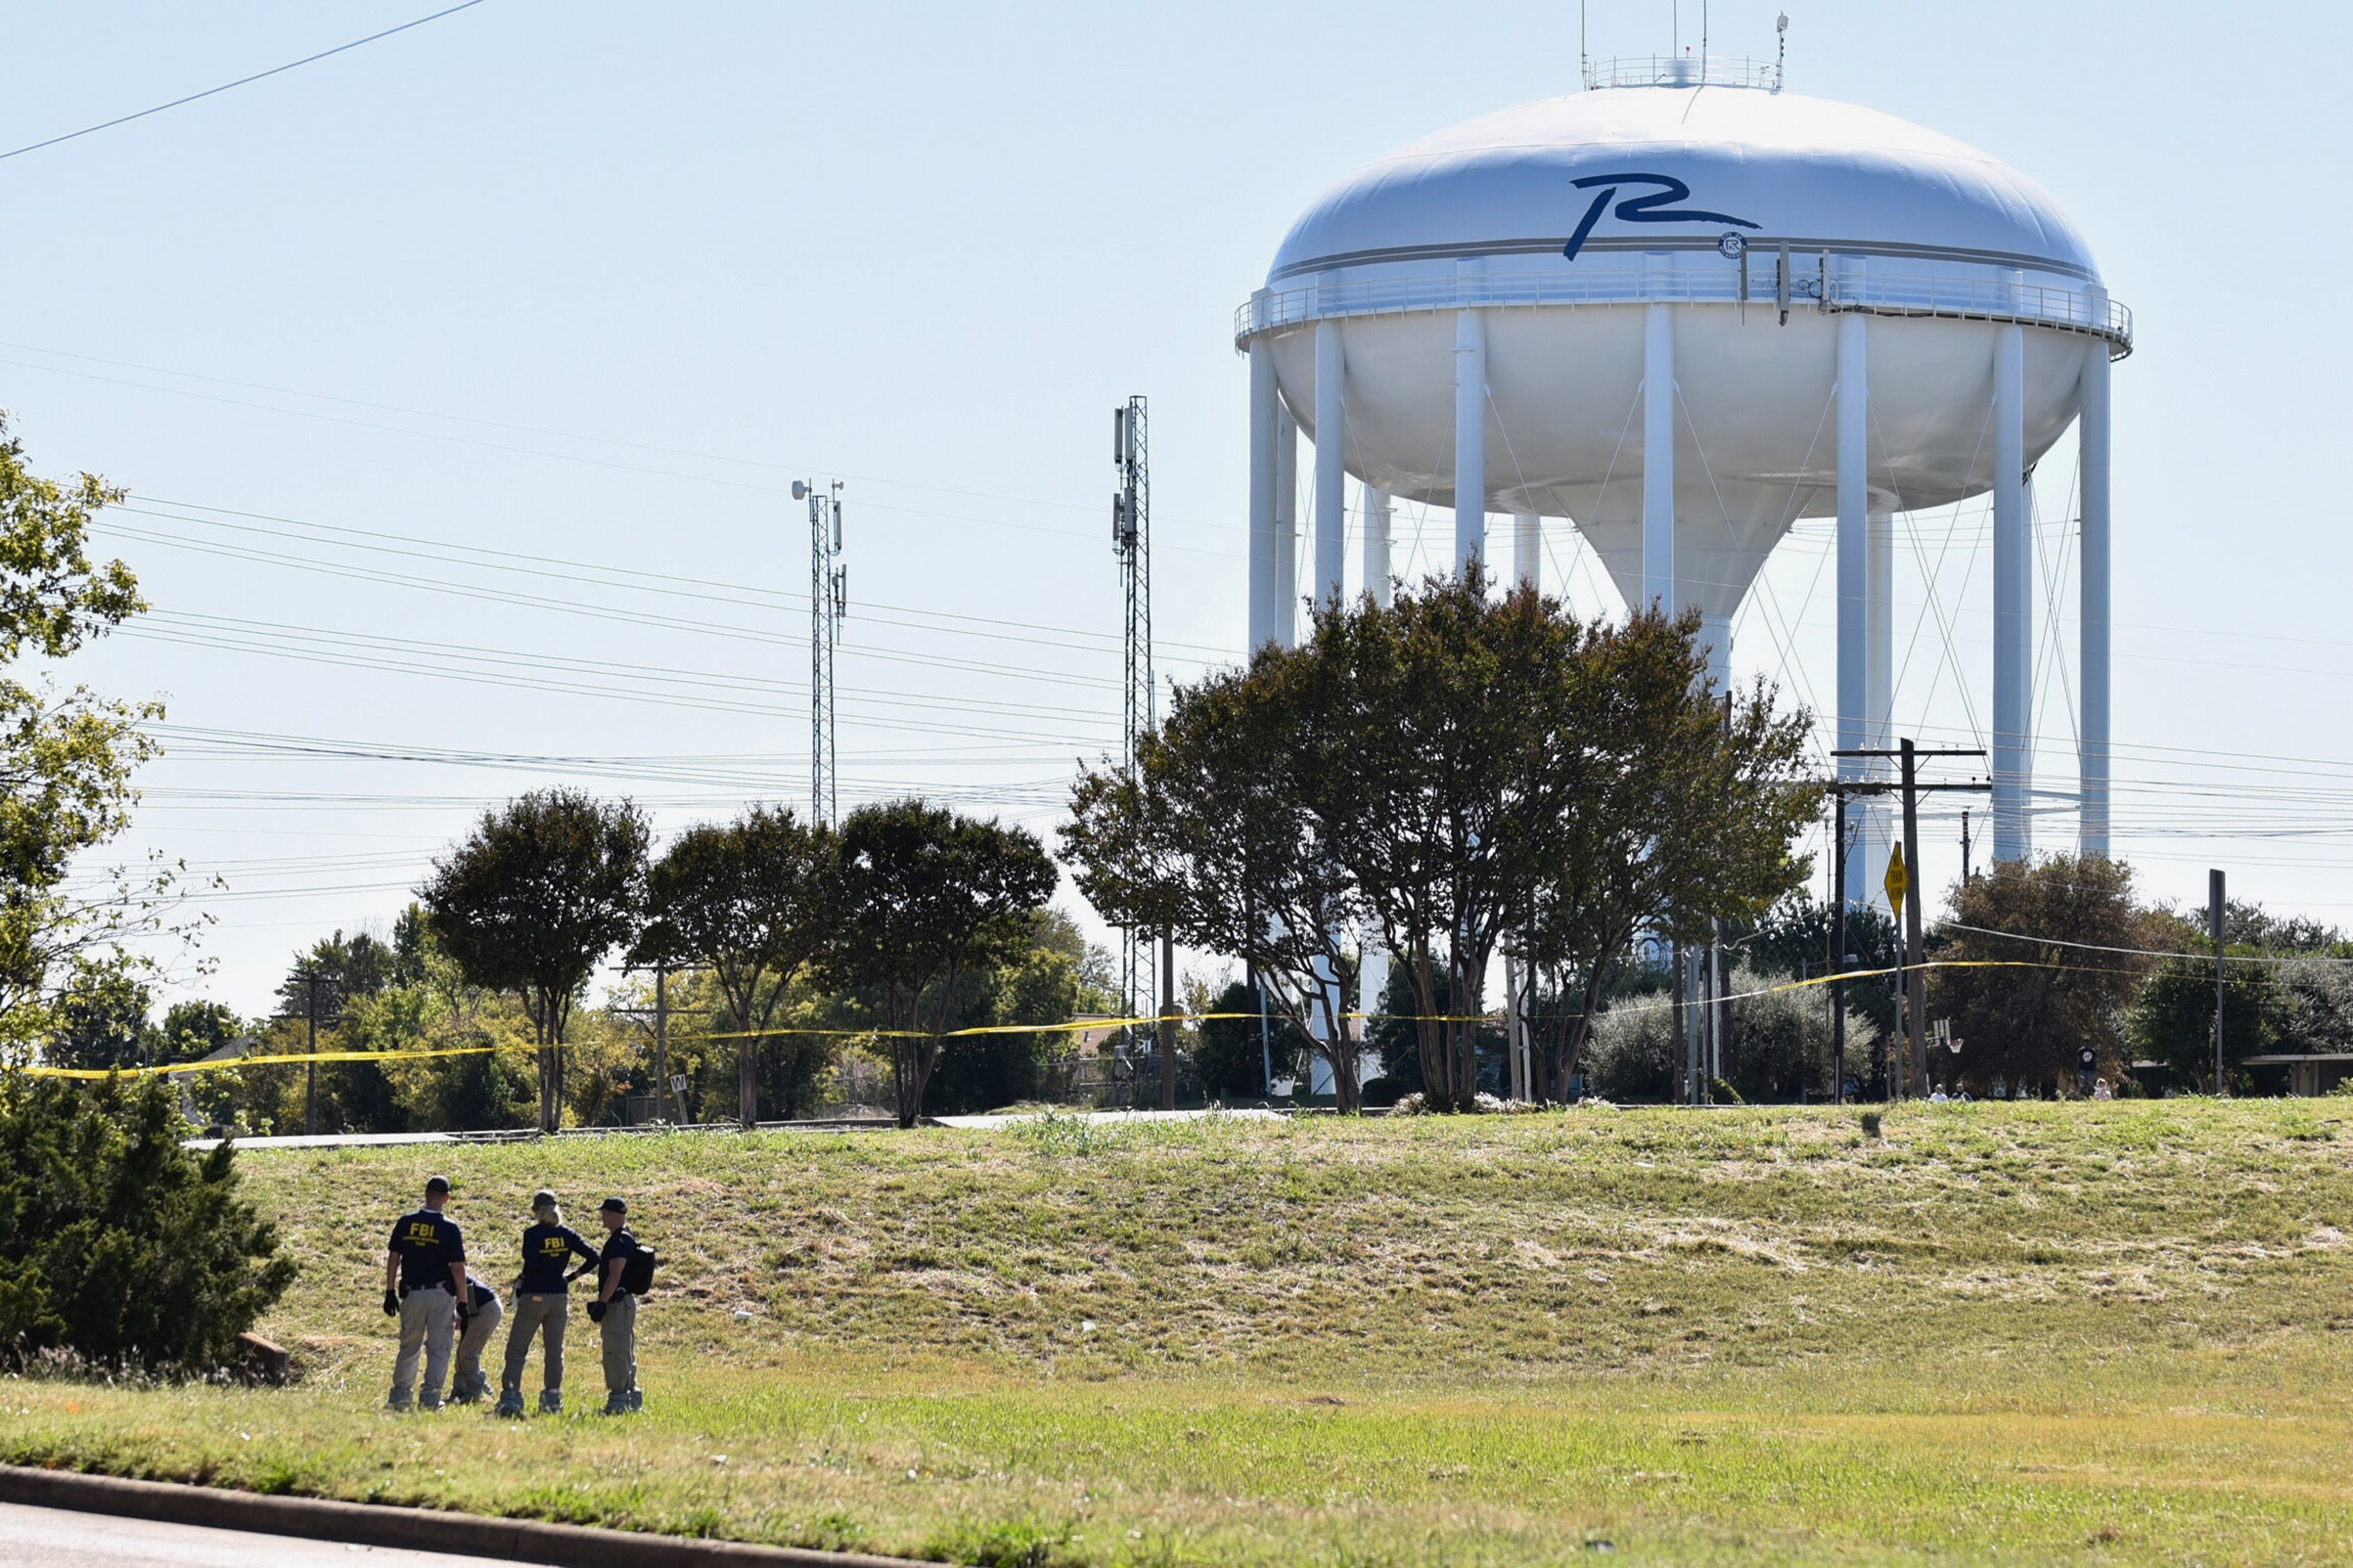 FBI investigators search a grassy area near a ditch where a child's body was found, as the search continued for a missing girl in Richardson, Texas, on Oct. 22, 2017. (Ben Torres—The Dallas Morning News/AP)